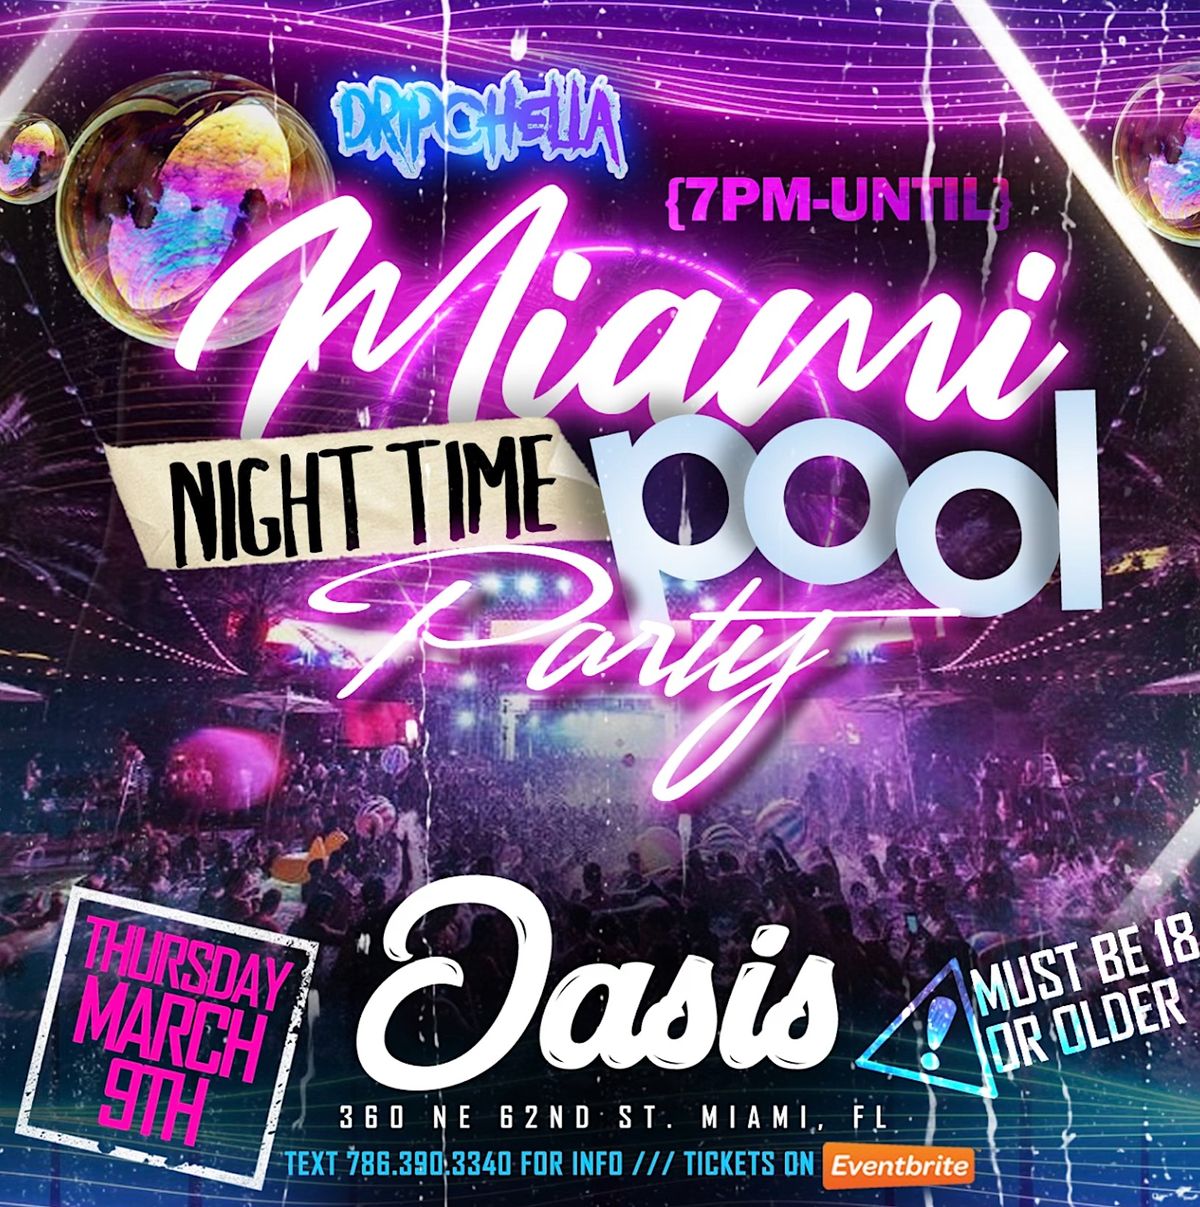 MIAMI NIGHT TIME POOL PARTY [18 OR OLDER], OASIS, Miami, 16 March to 17